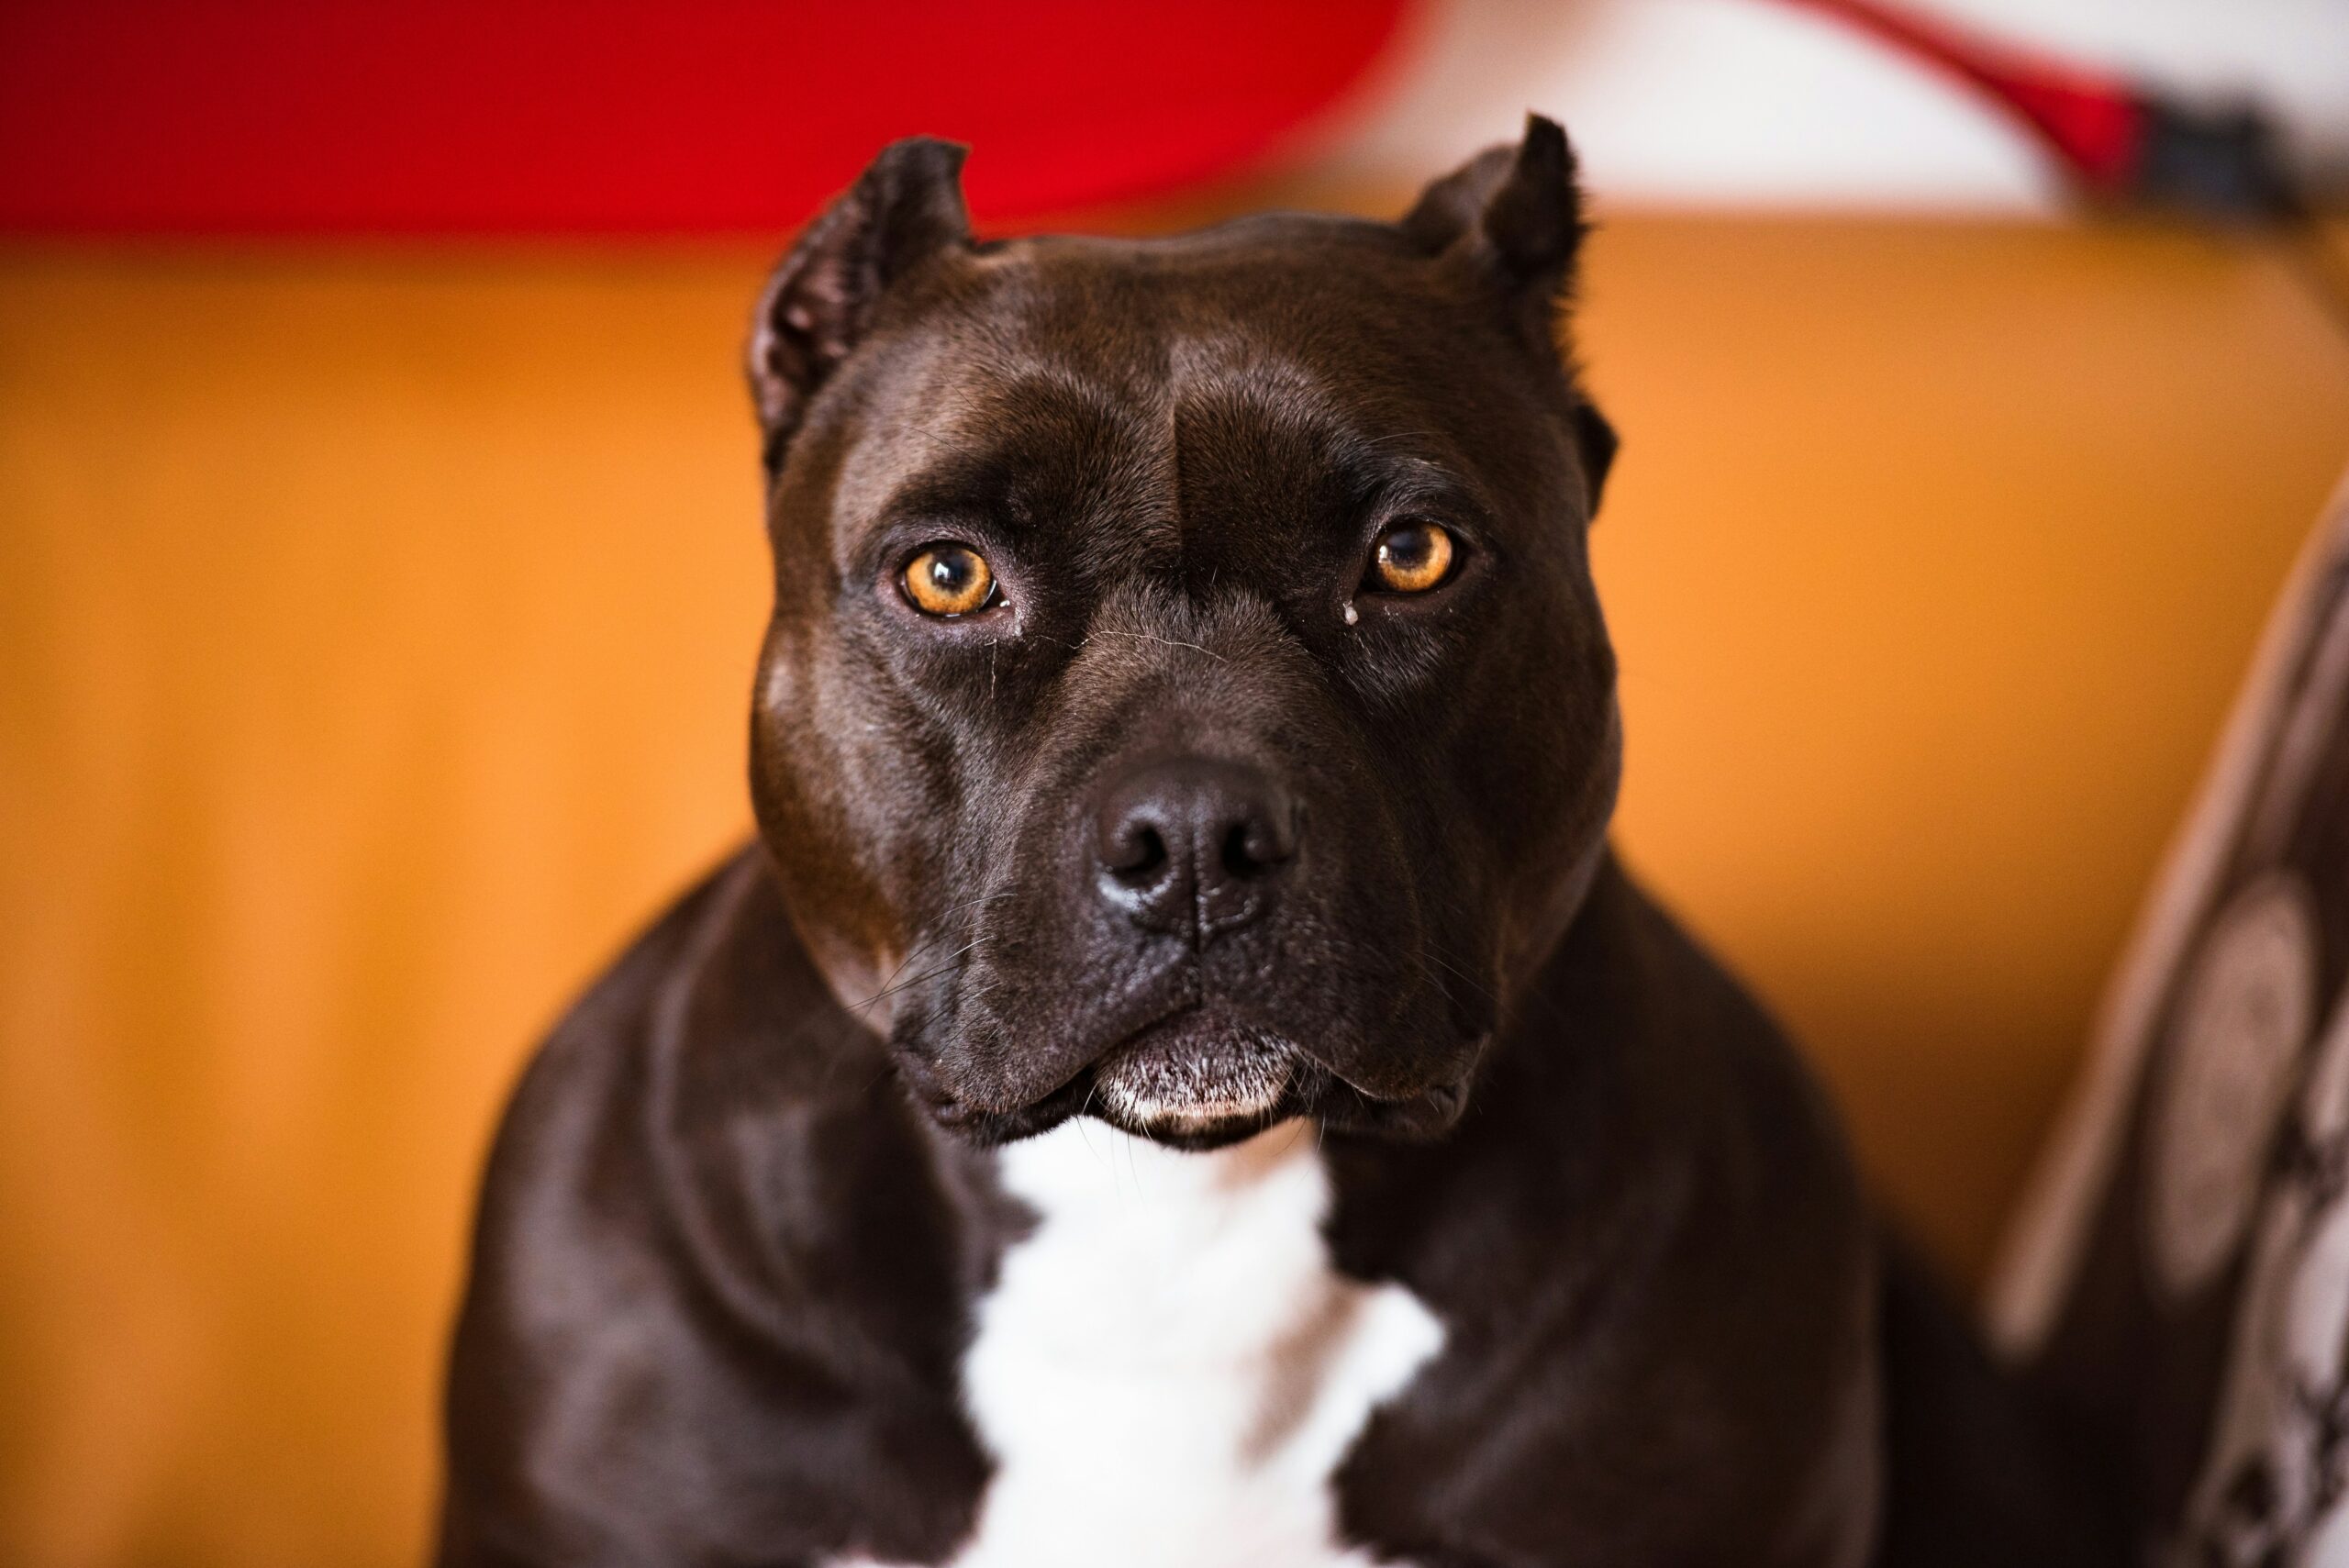 Pitbulls might look tough, but they are also fantastic therapy dogs. They have a lot of good qualities that make them perfect for helping people feel better. Here are ten reasons why Pitbulls are great therapy dogs.